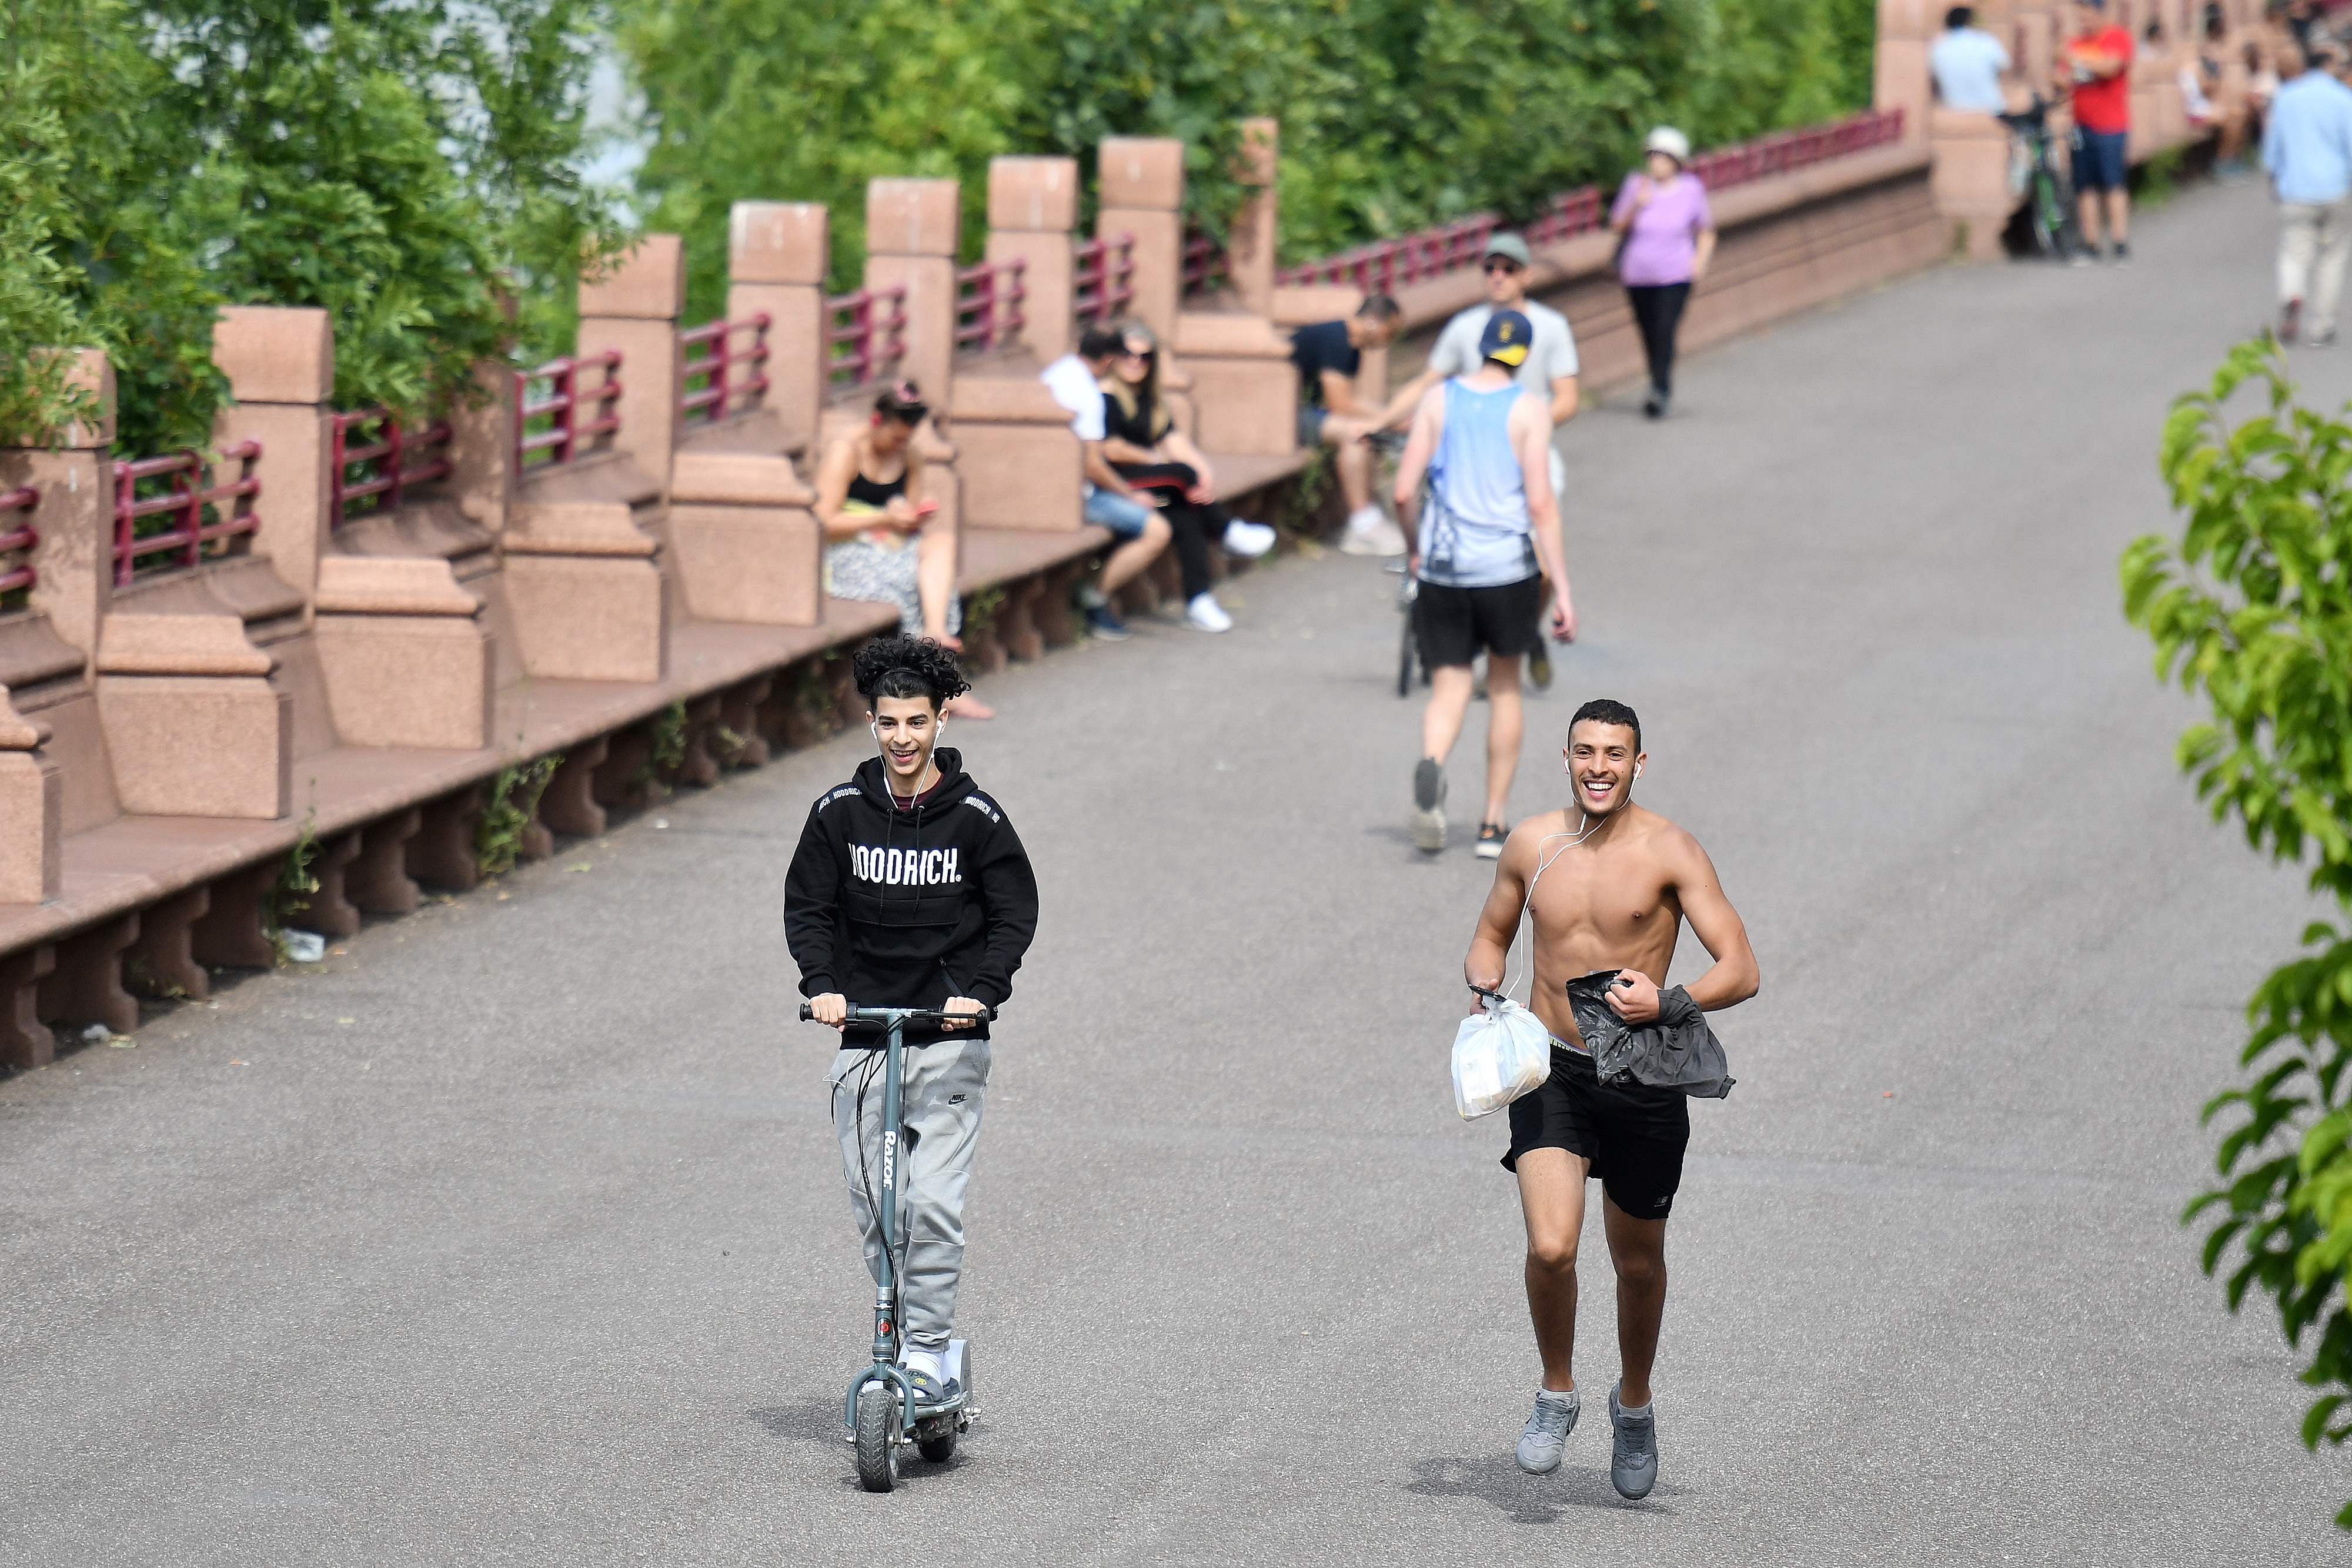 People enjoy the sunshine as they exercise in Battersea Park, near the River Thames in London on June 2, 2020, as warm weather continues during the coronavirus lockdown. (Credit: AFP Photo)